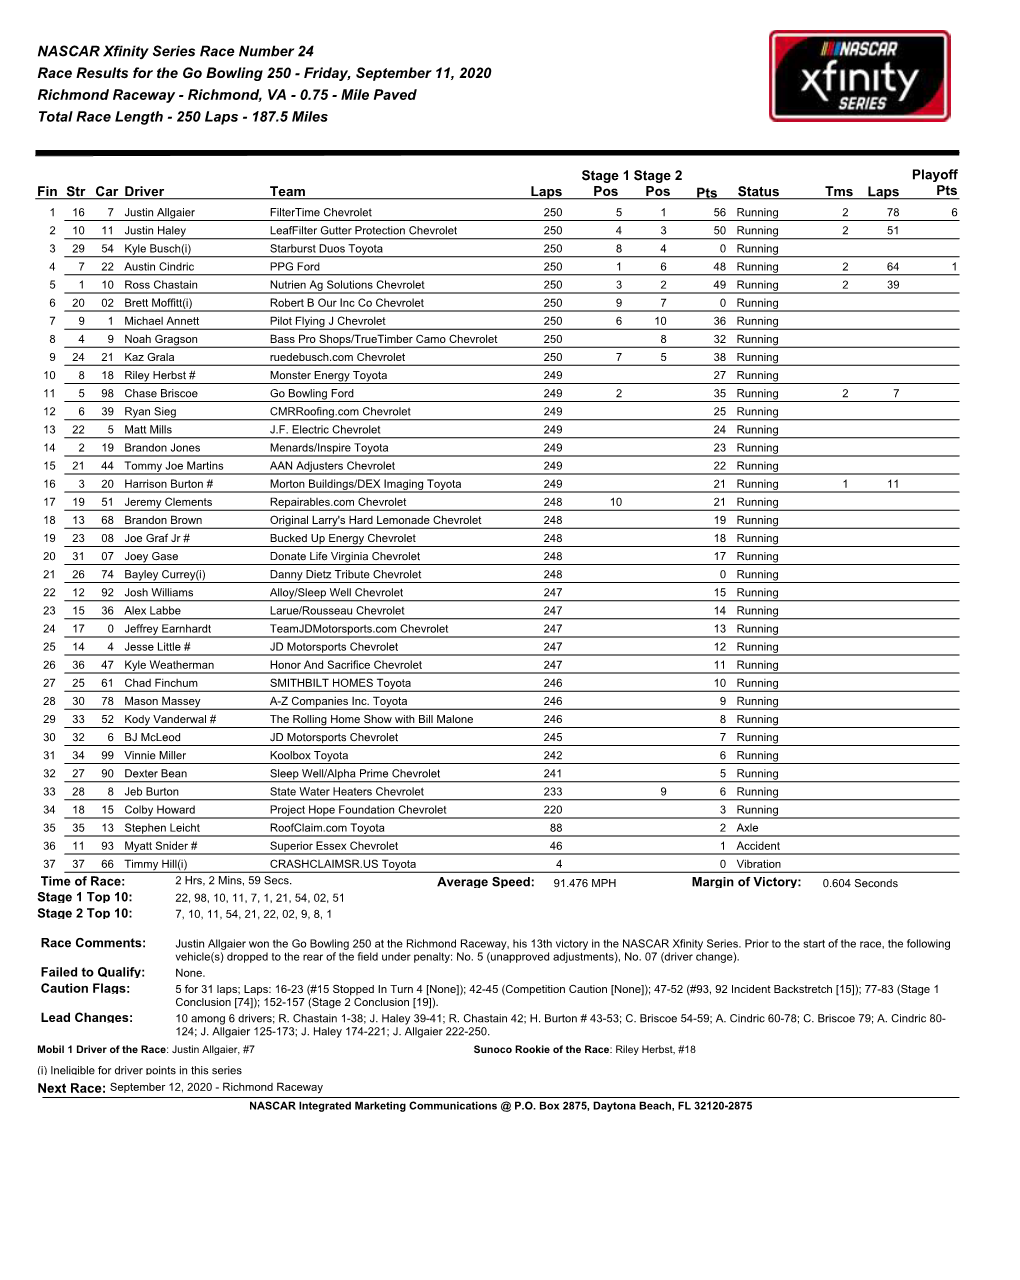 NASCAR Xfinity Series Race Number 24 Race Results